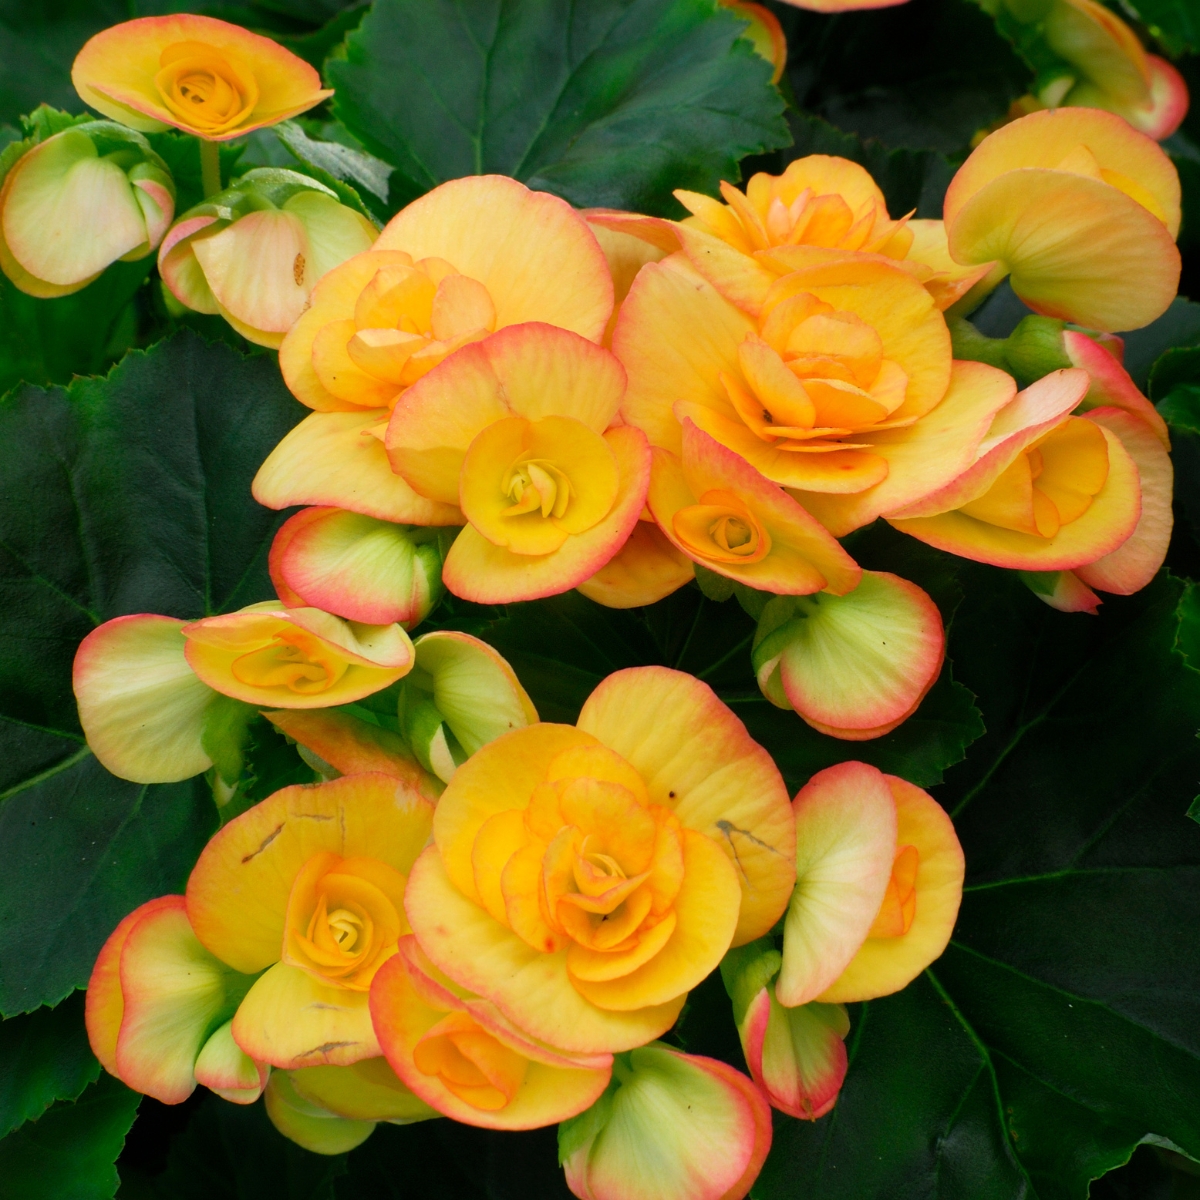 yellow begonias with red margins